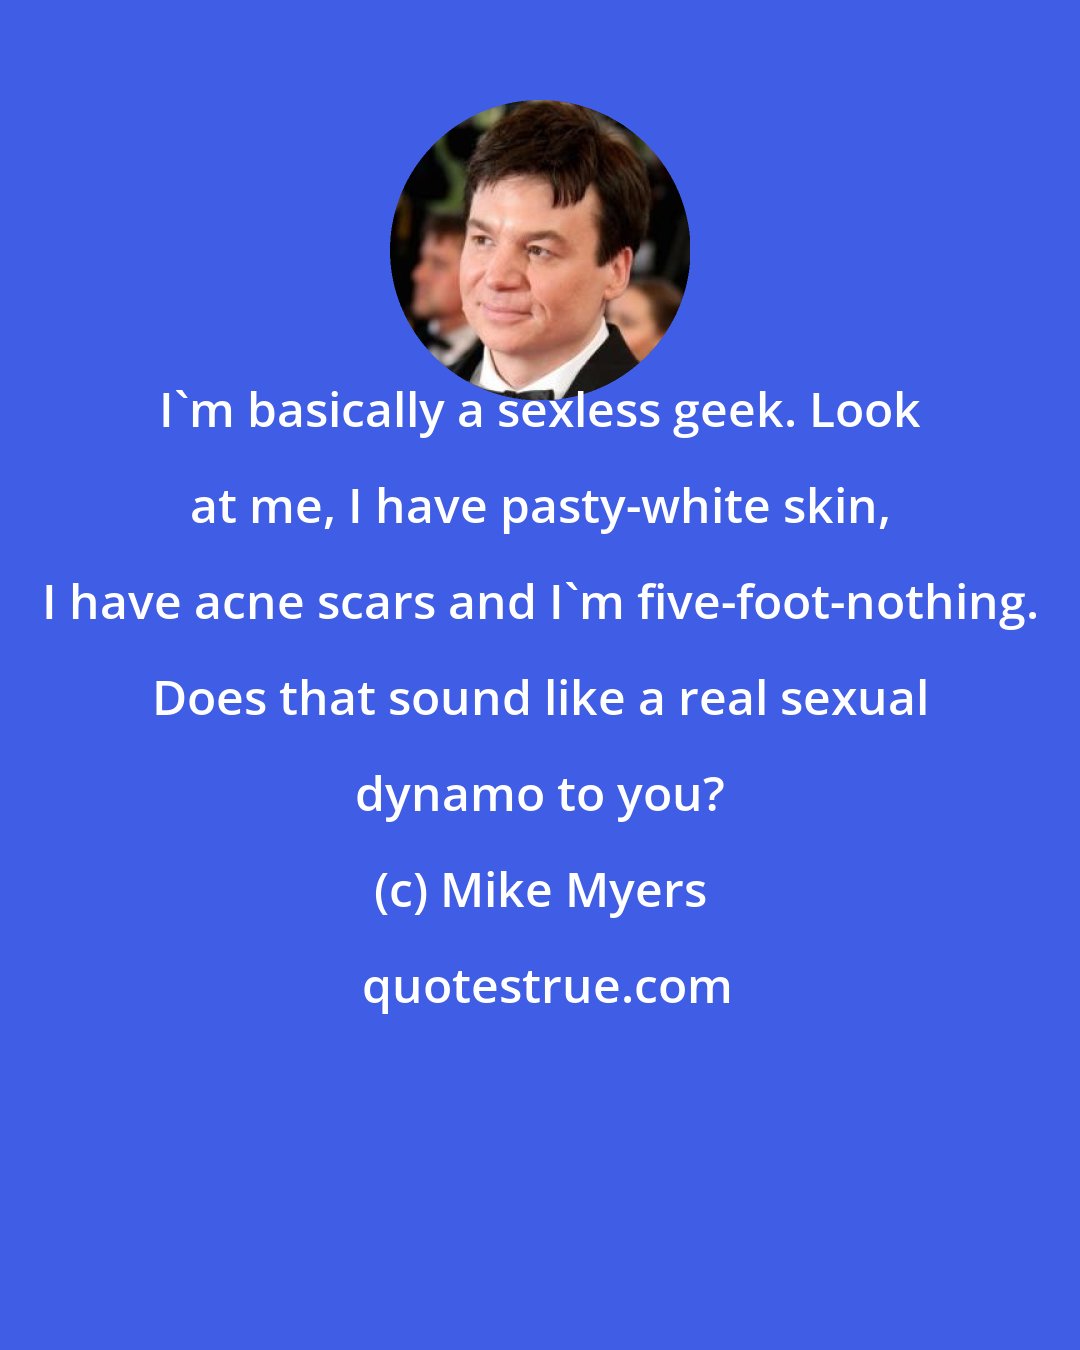 Mike Myers: I'm basically a sexless geek. Look at me, I have pasty-white skin, I have acne scars and I'm five-foot-nothing. Does that sound like a real sexual dynamo to you?